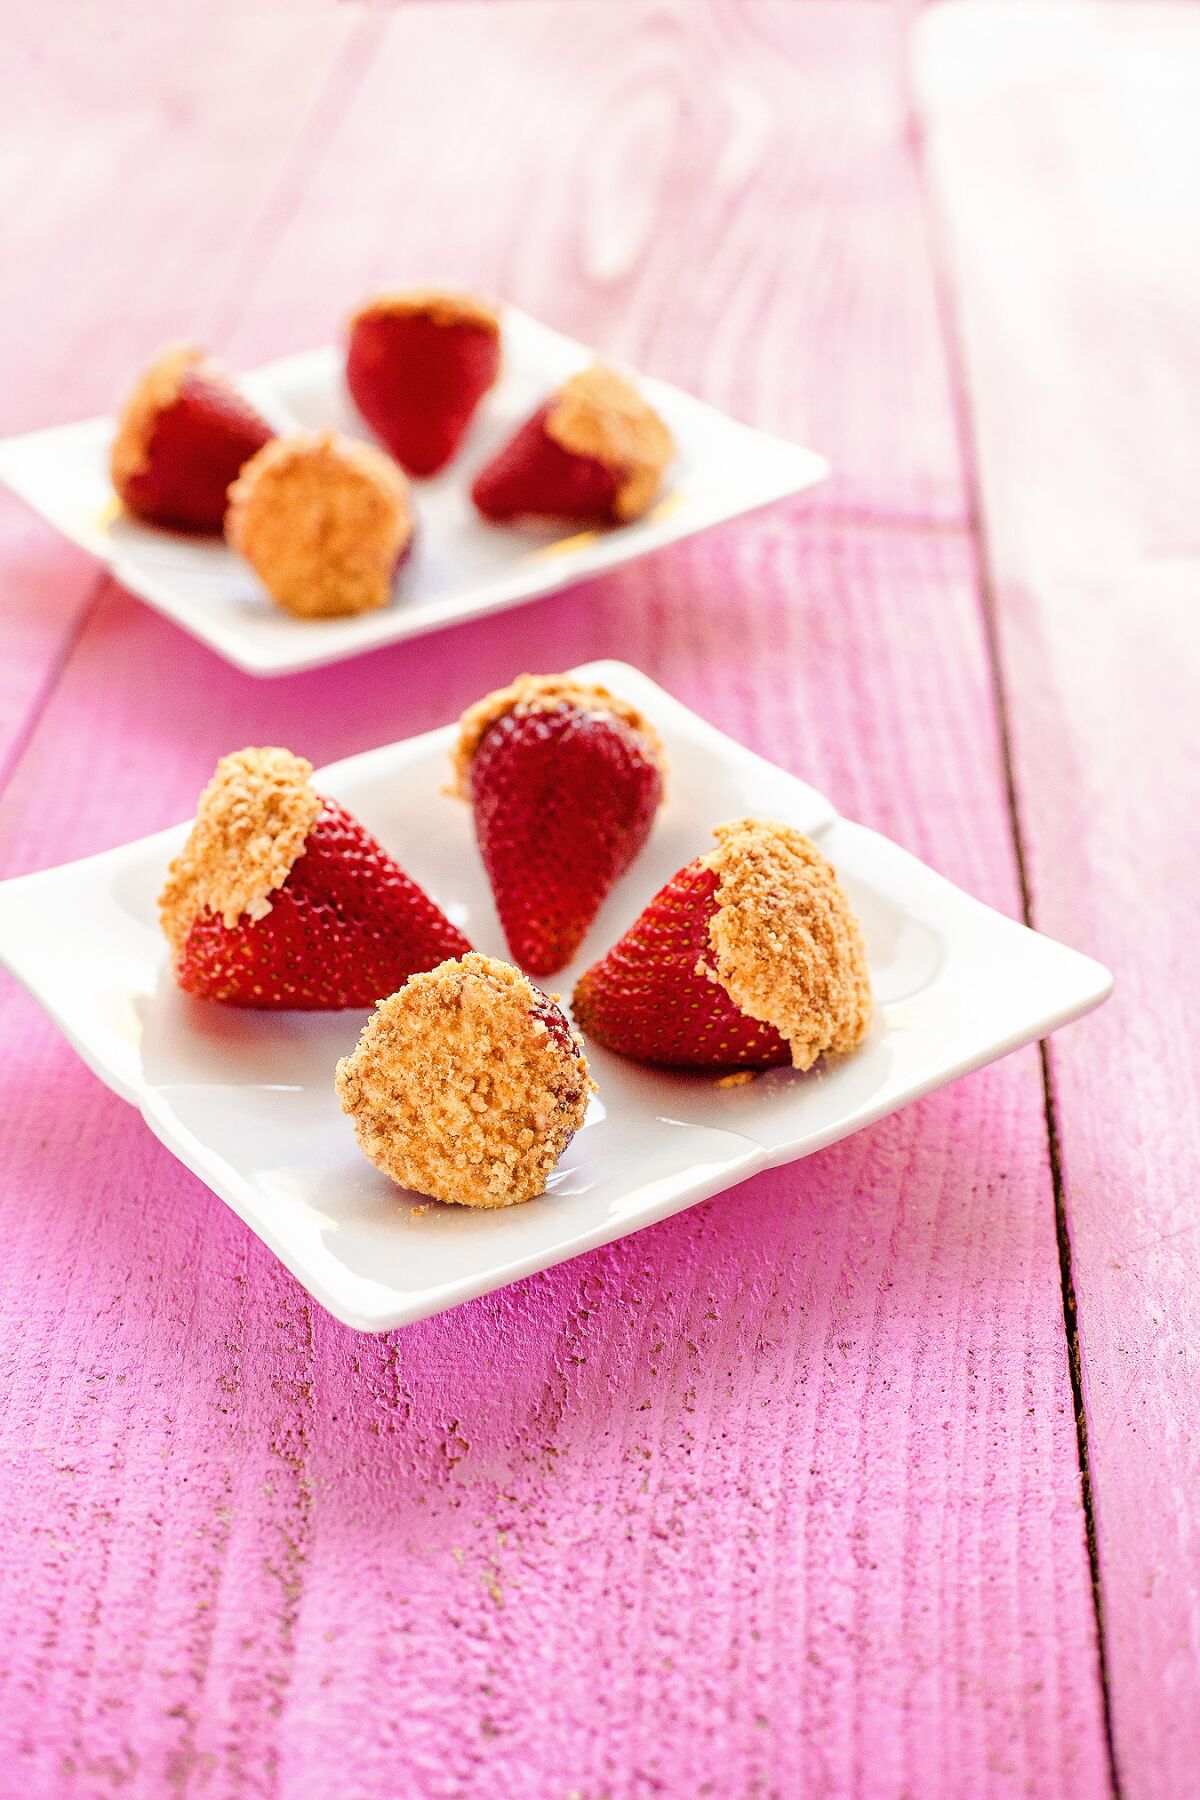 Strawberries stuffed with the flavors of a classic cheesecake